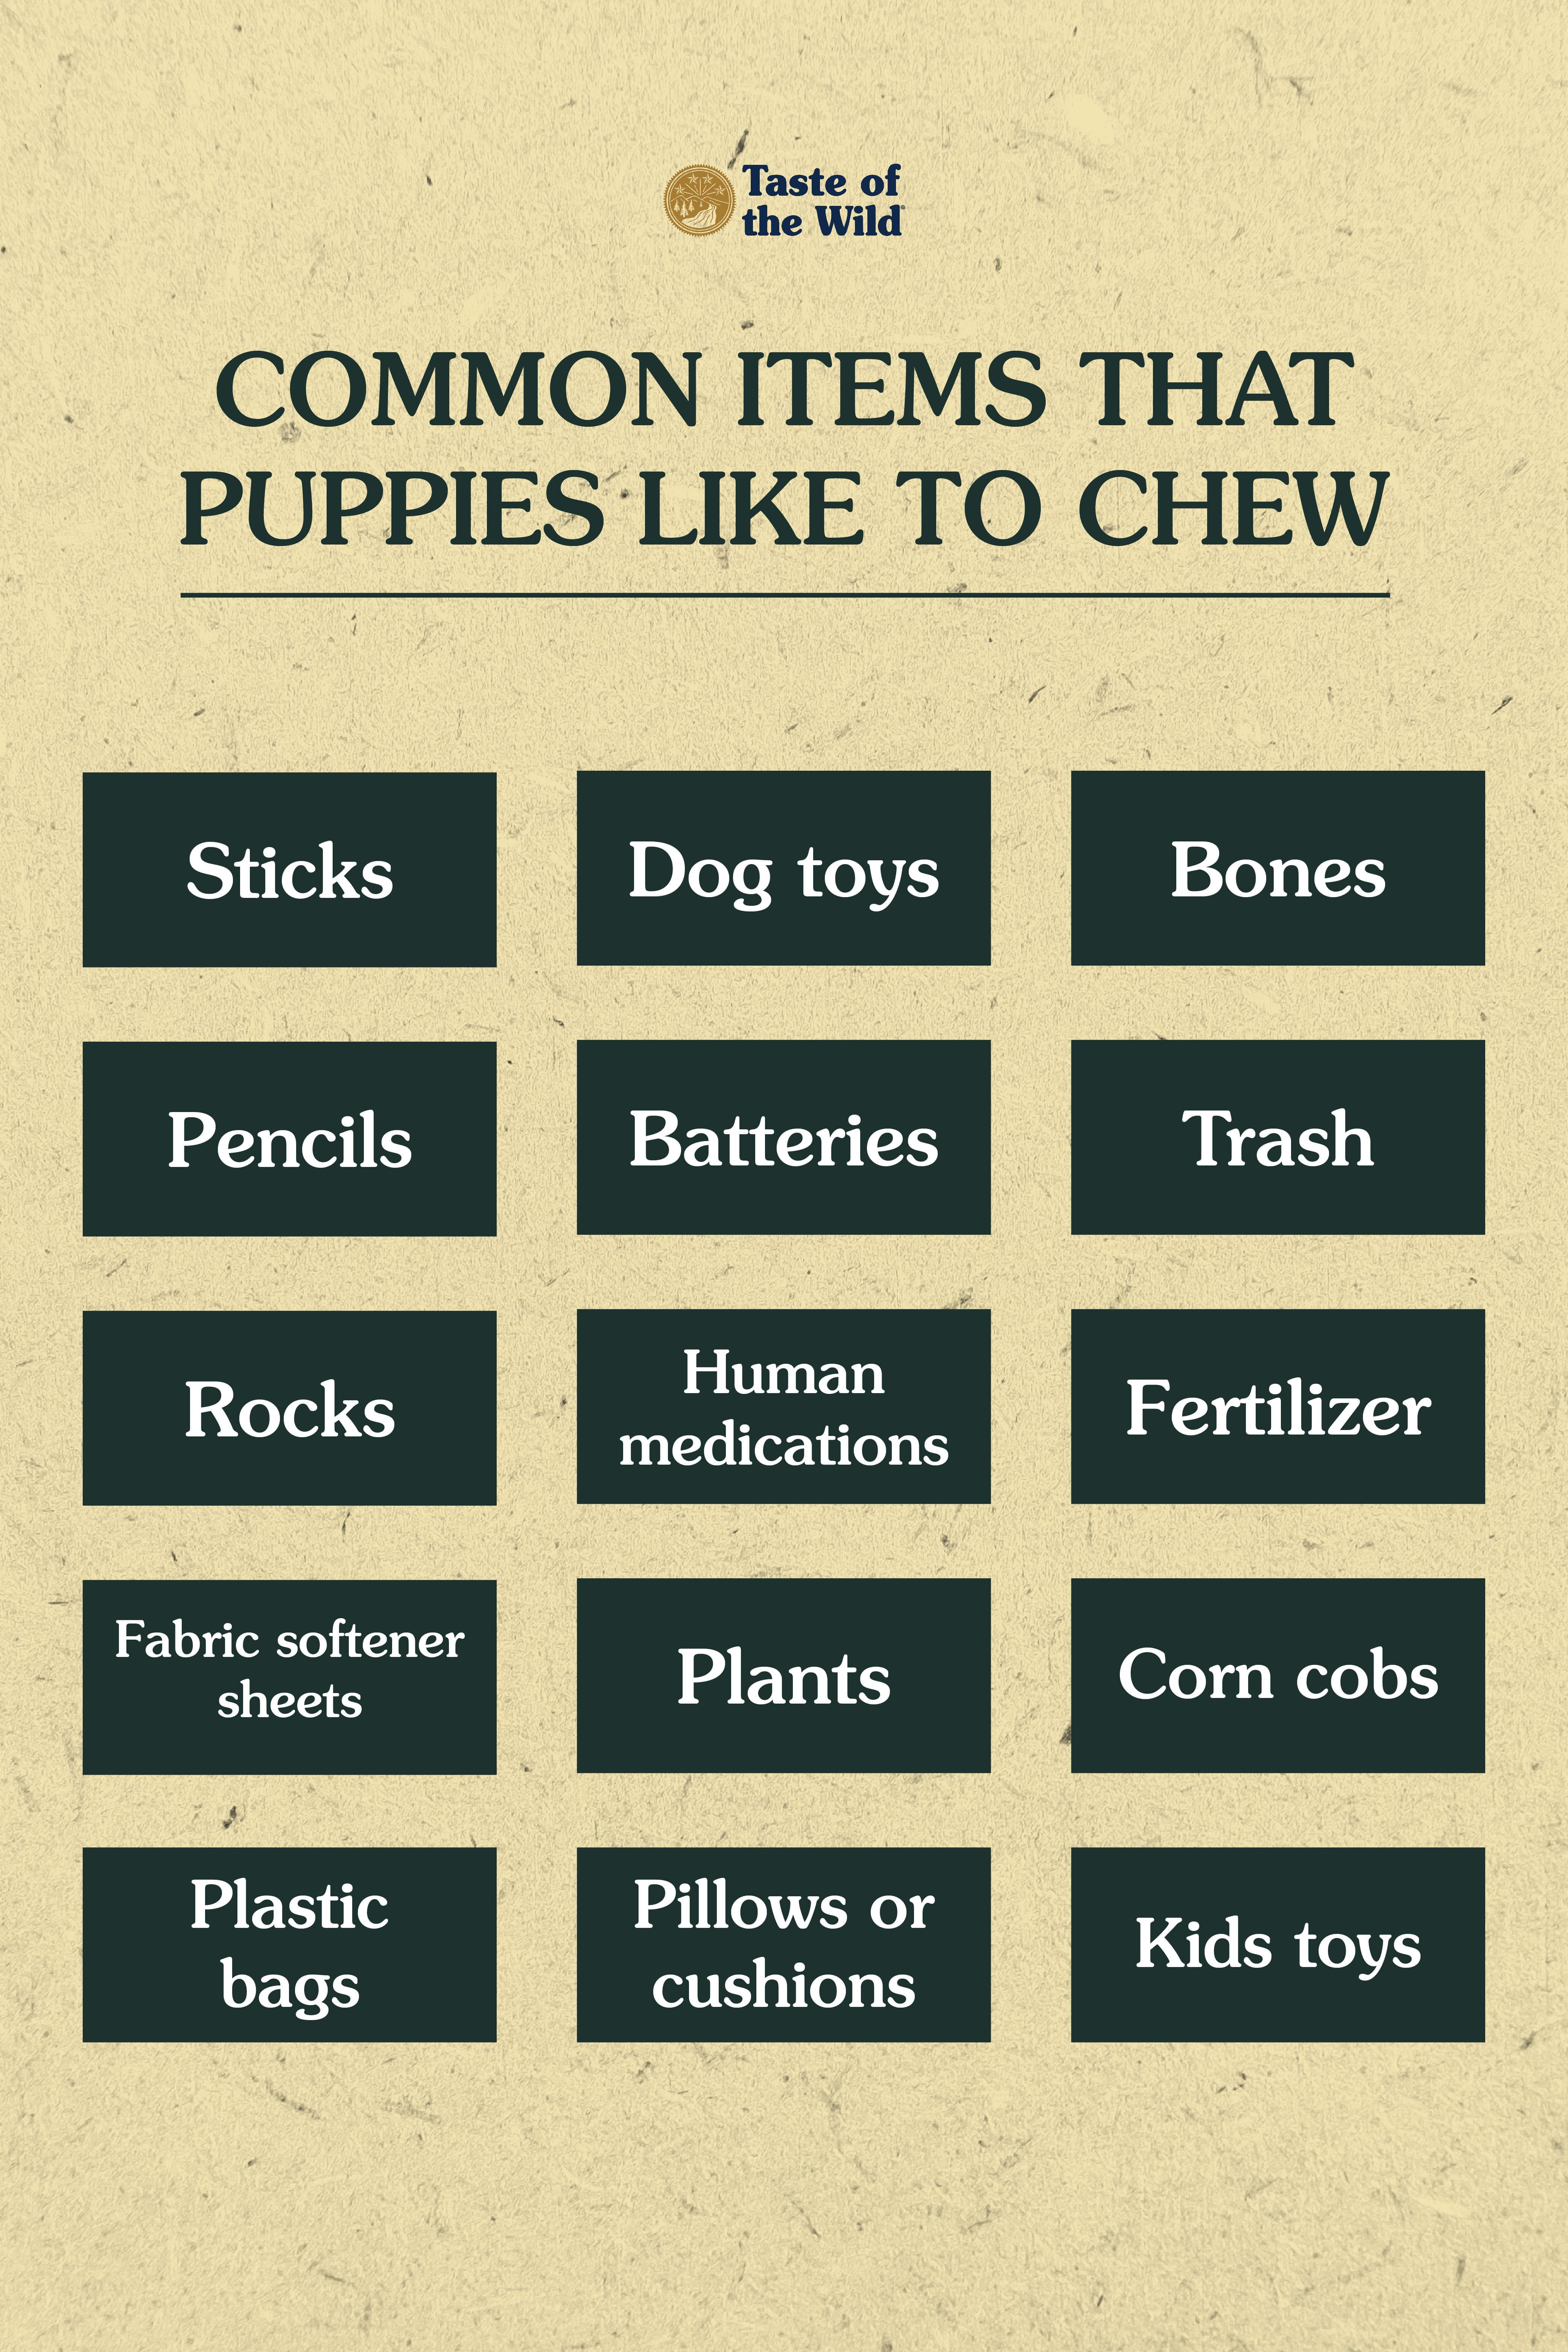 An interior graphic detailing common items that puppies like to chew.